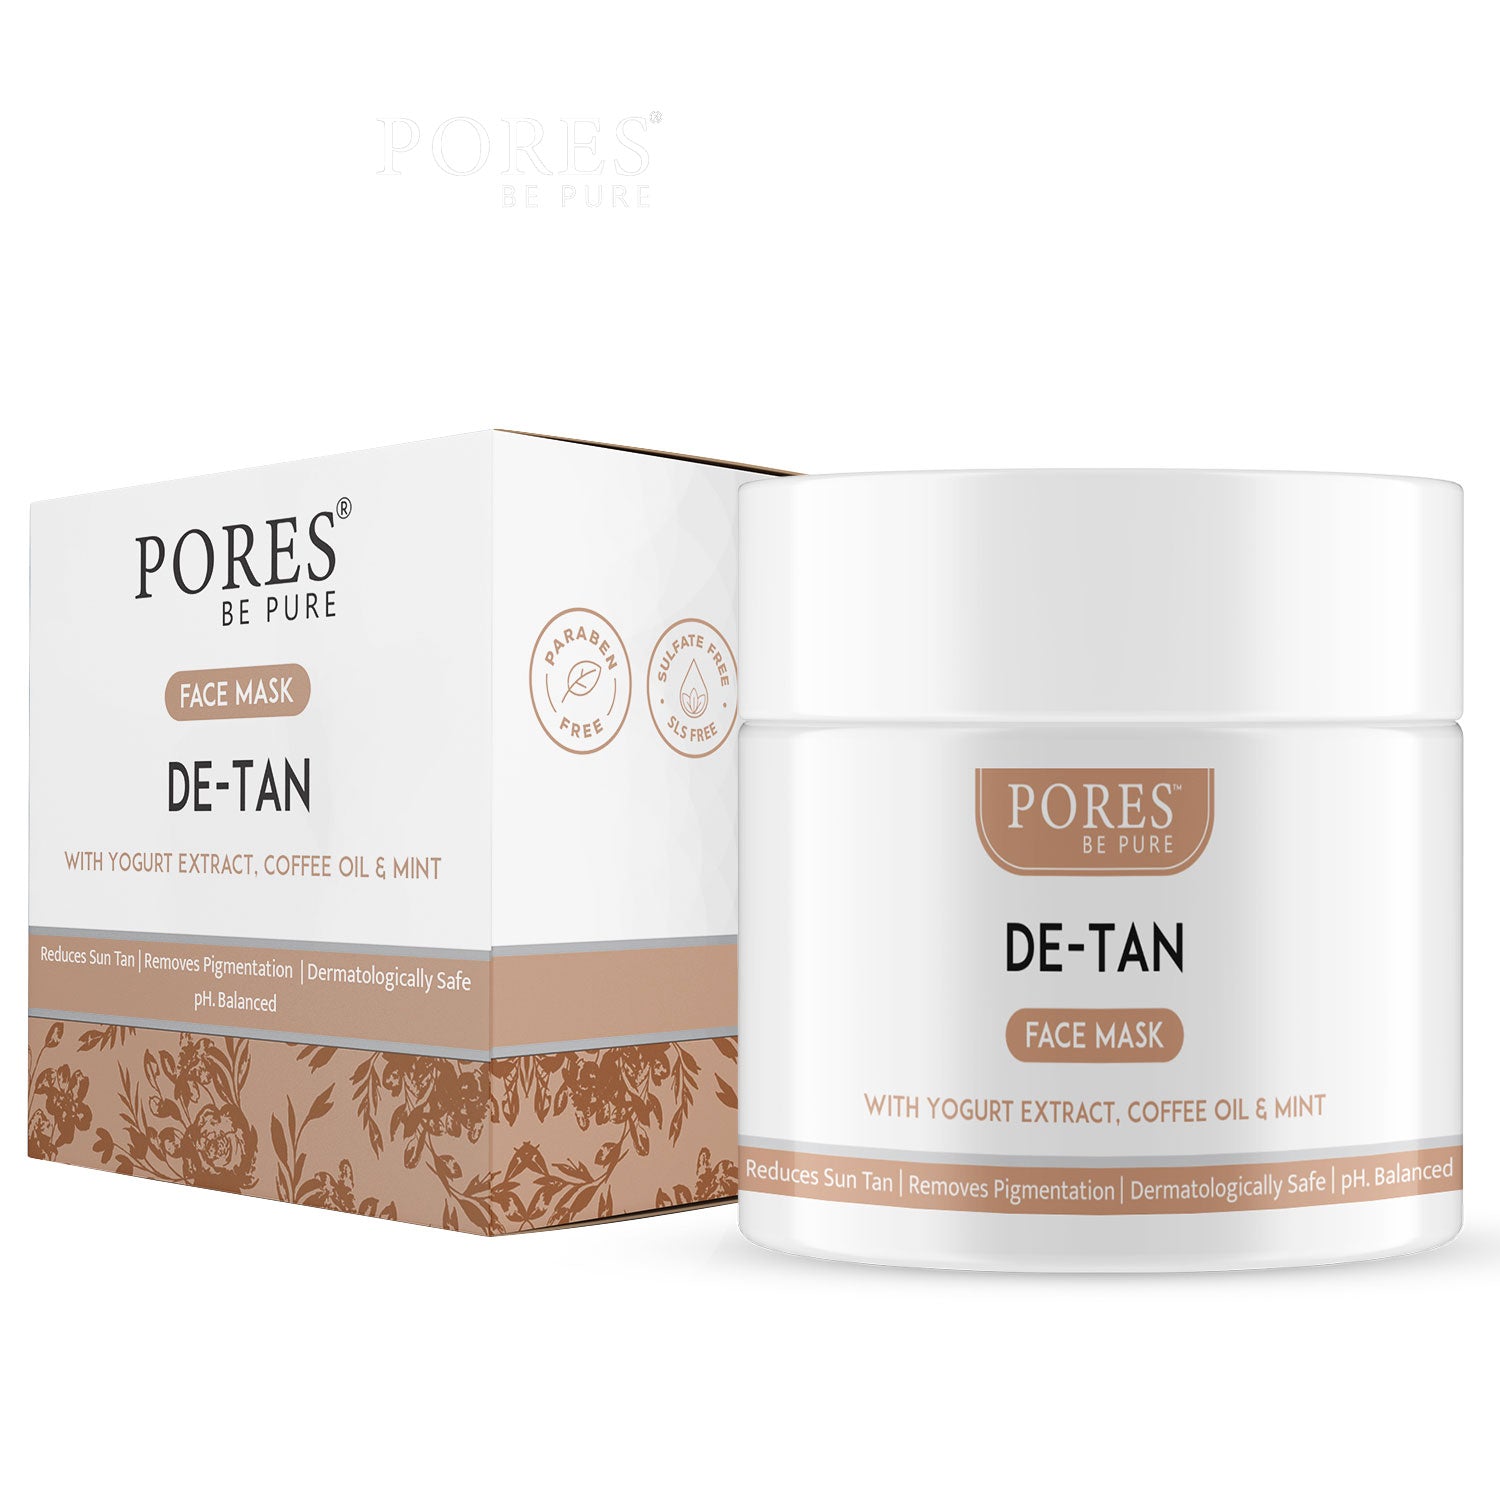 DE-TAN FACE MASK - With Yogurt Extract, Coffee Oil & Mint - 100 G